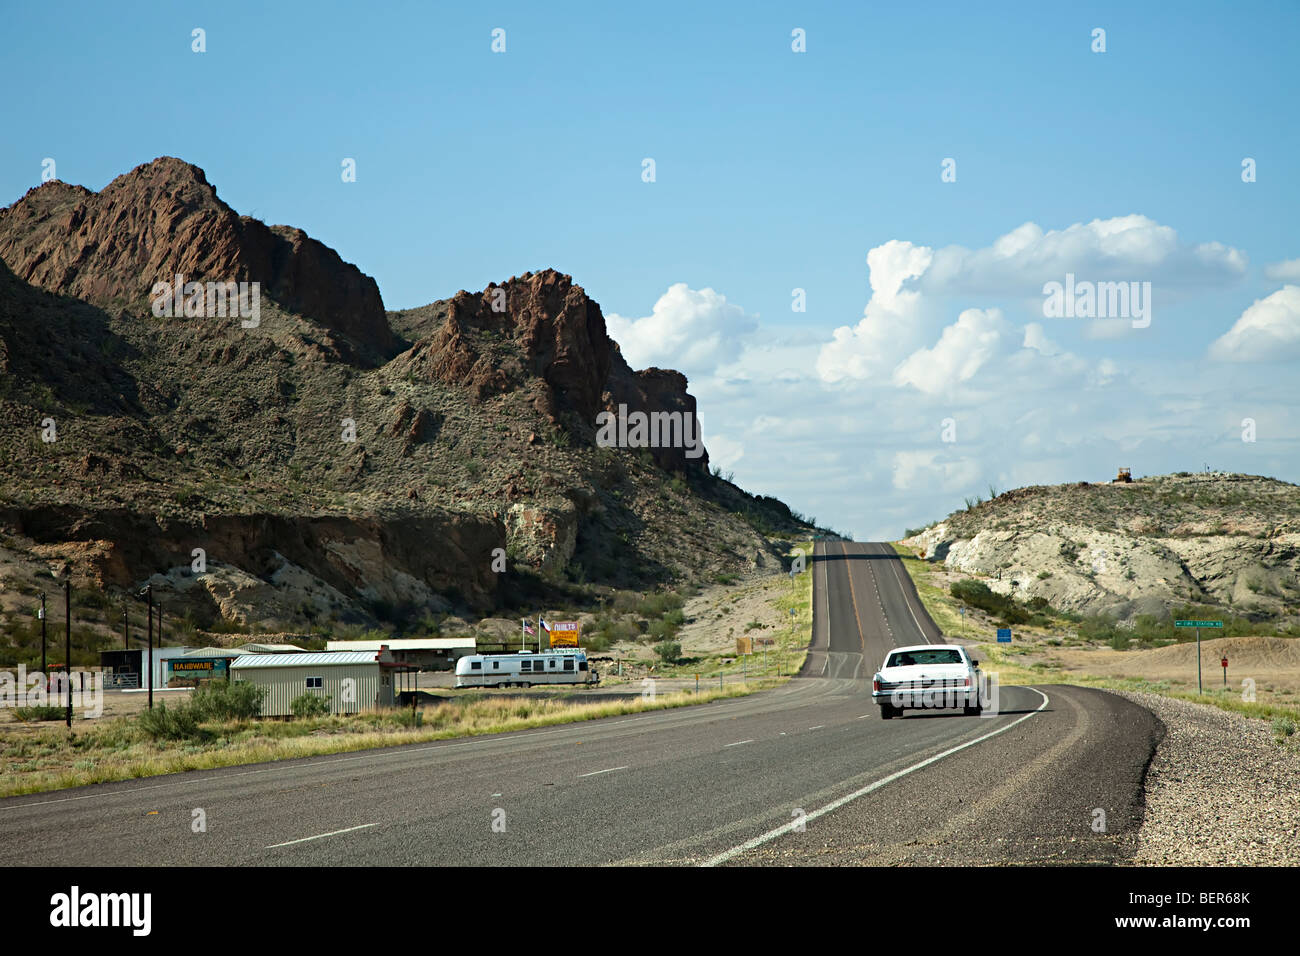 Open road with trailer park Study Butte Texas USA Stock Photo